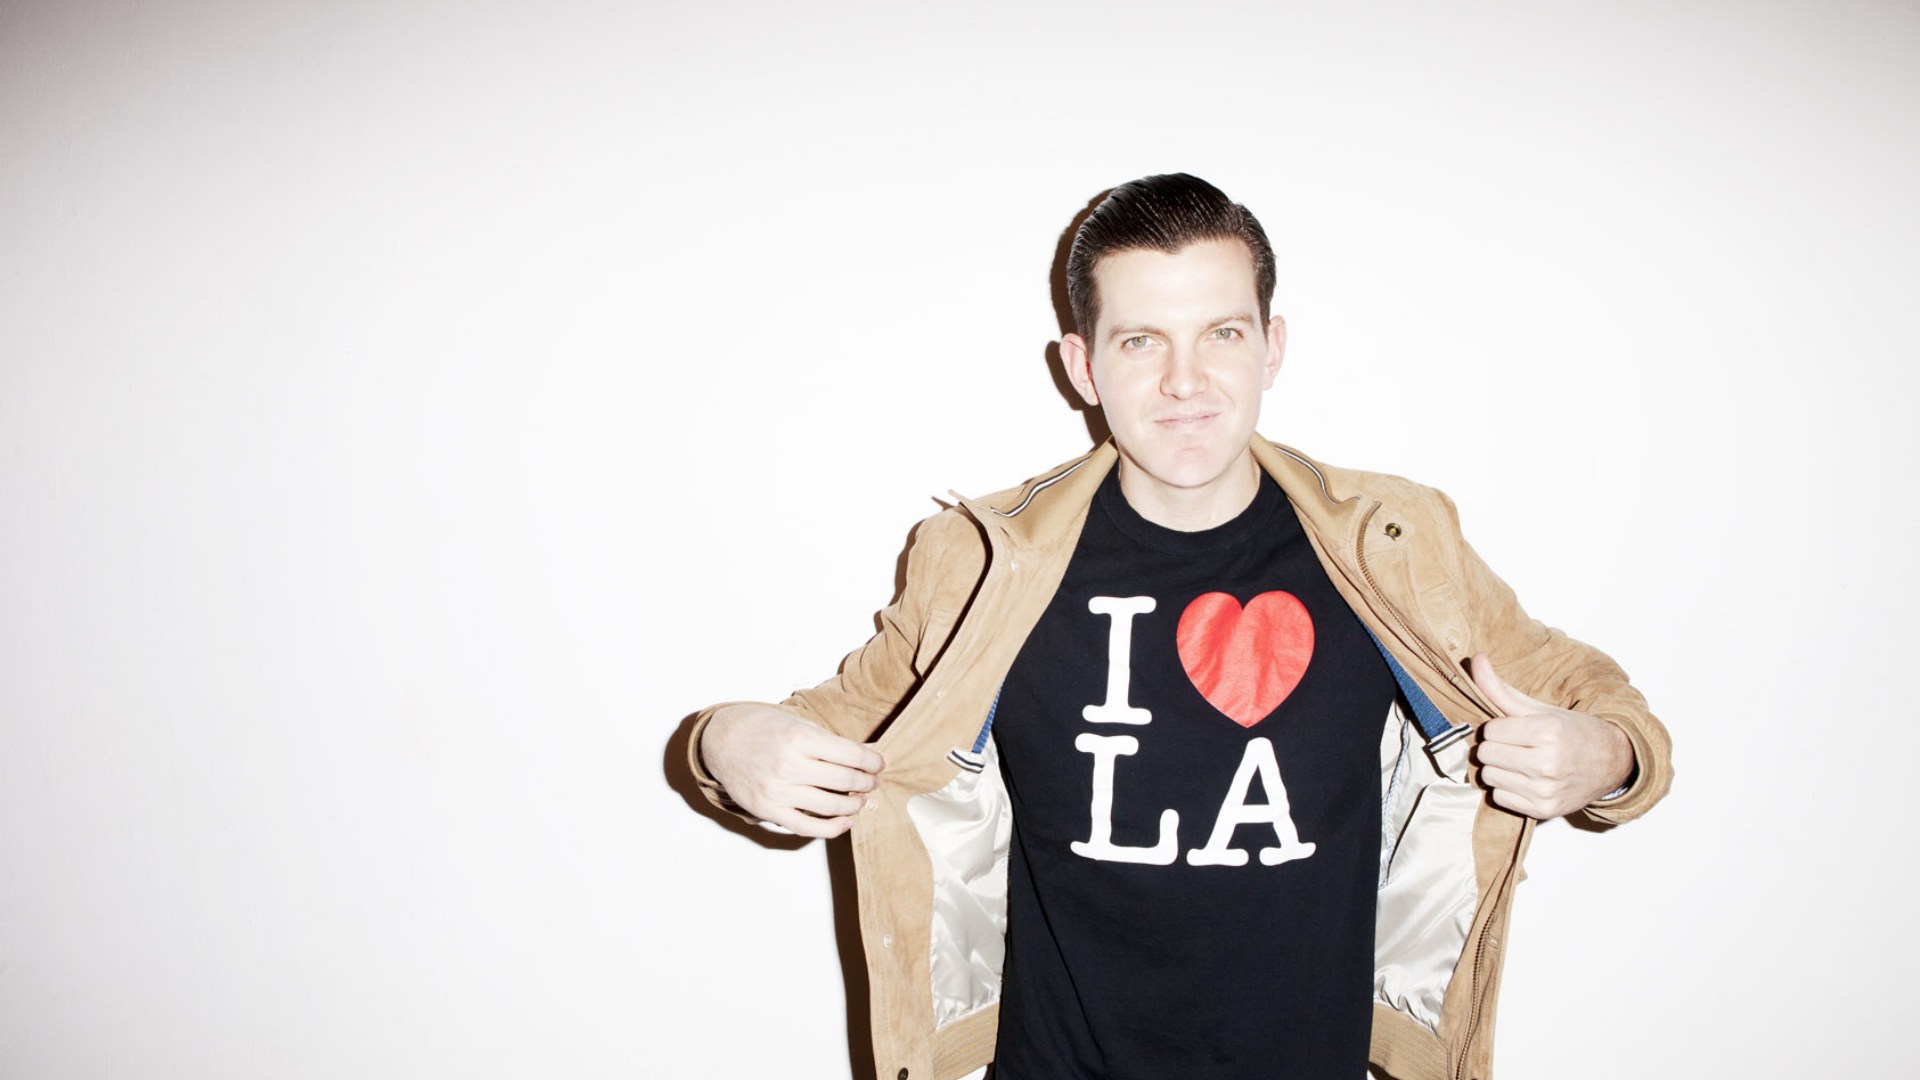 Without You (Feat. Totally Enormous Extinct Dinosaurs) av Dillon Francis